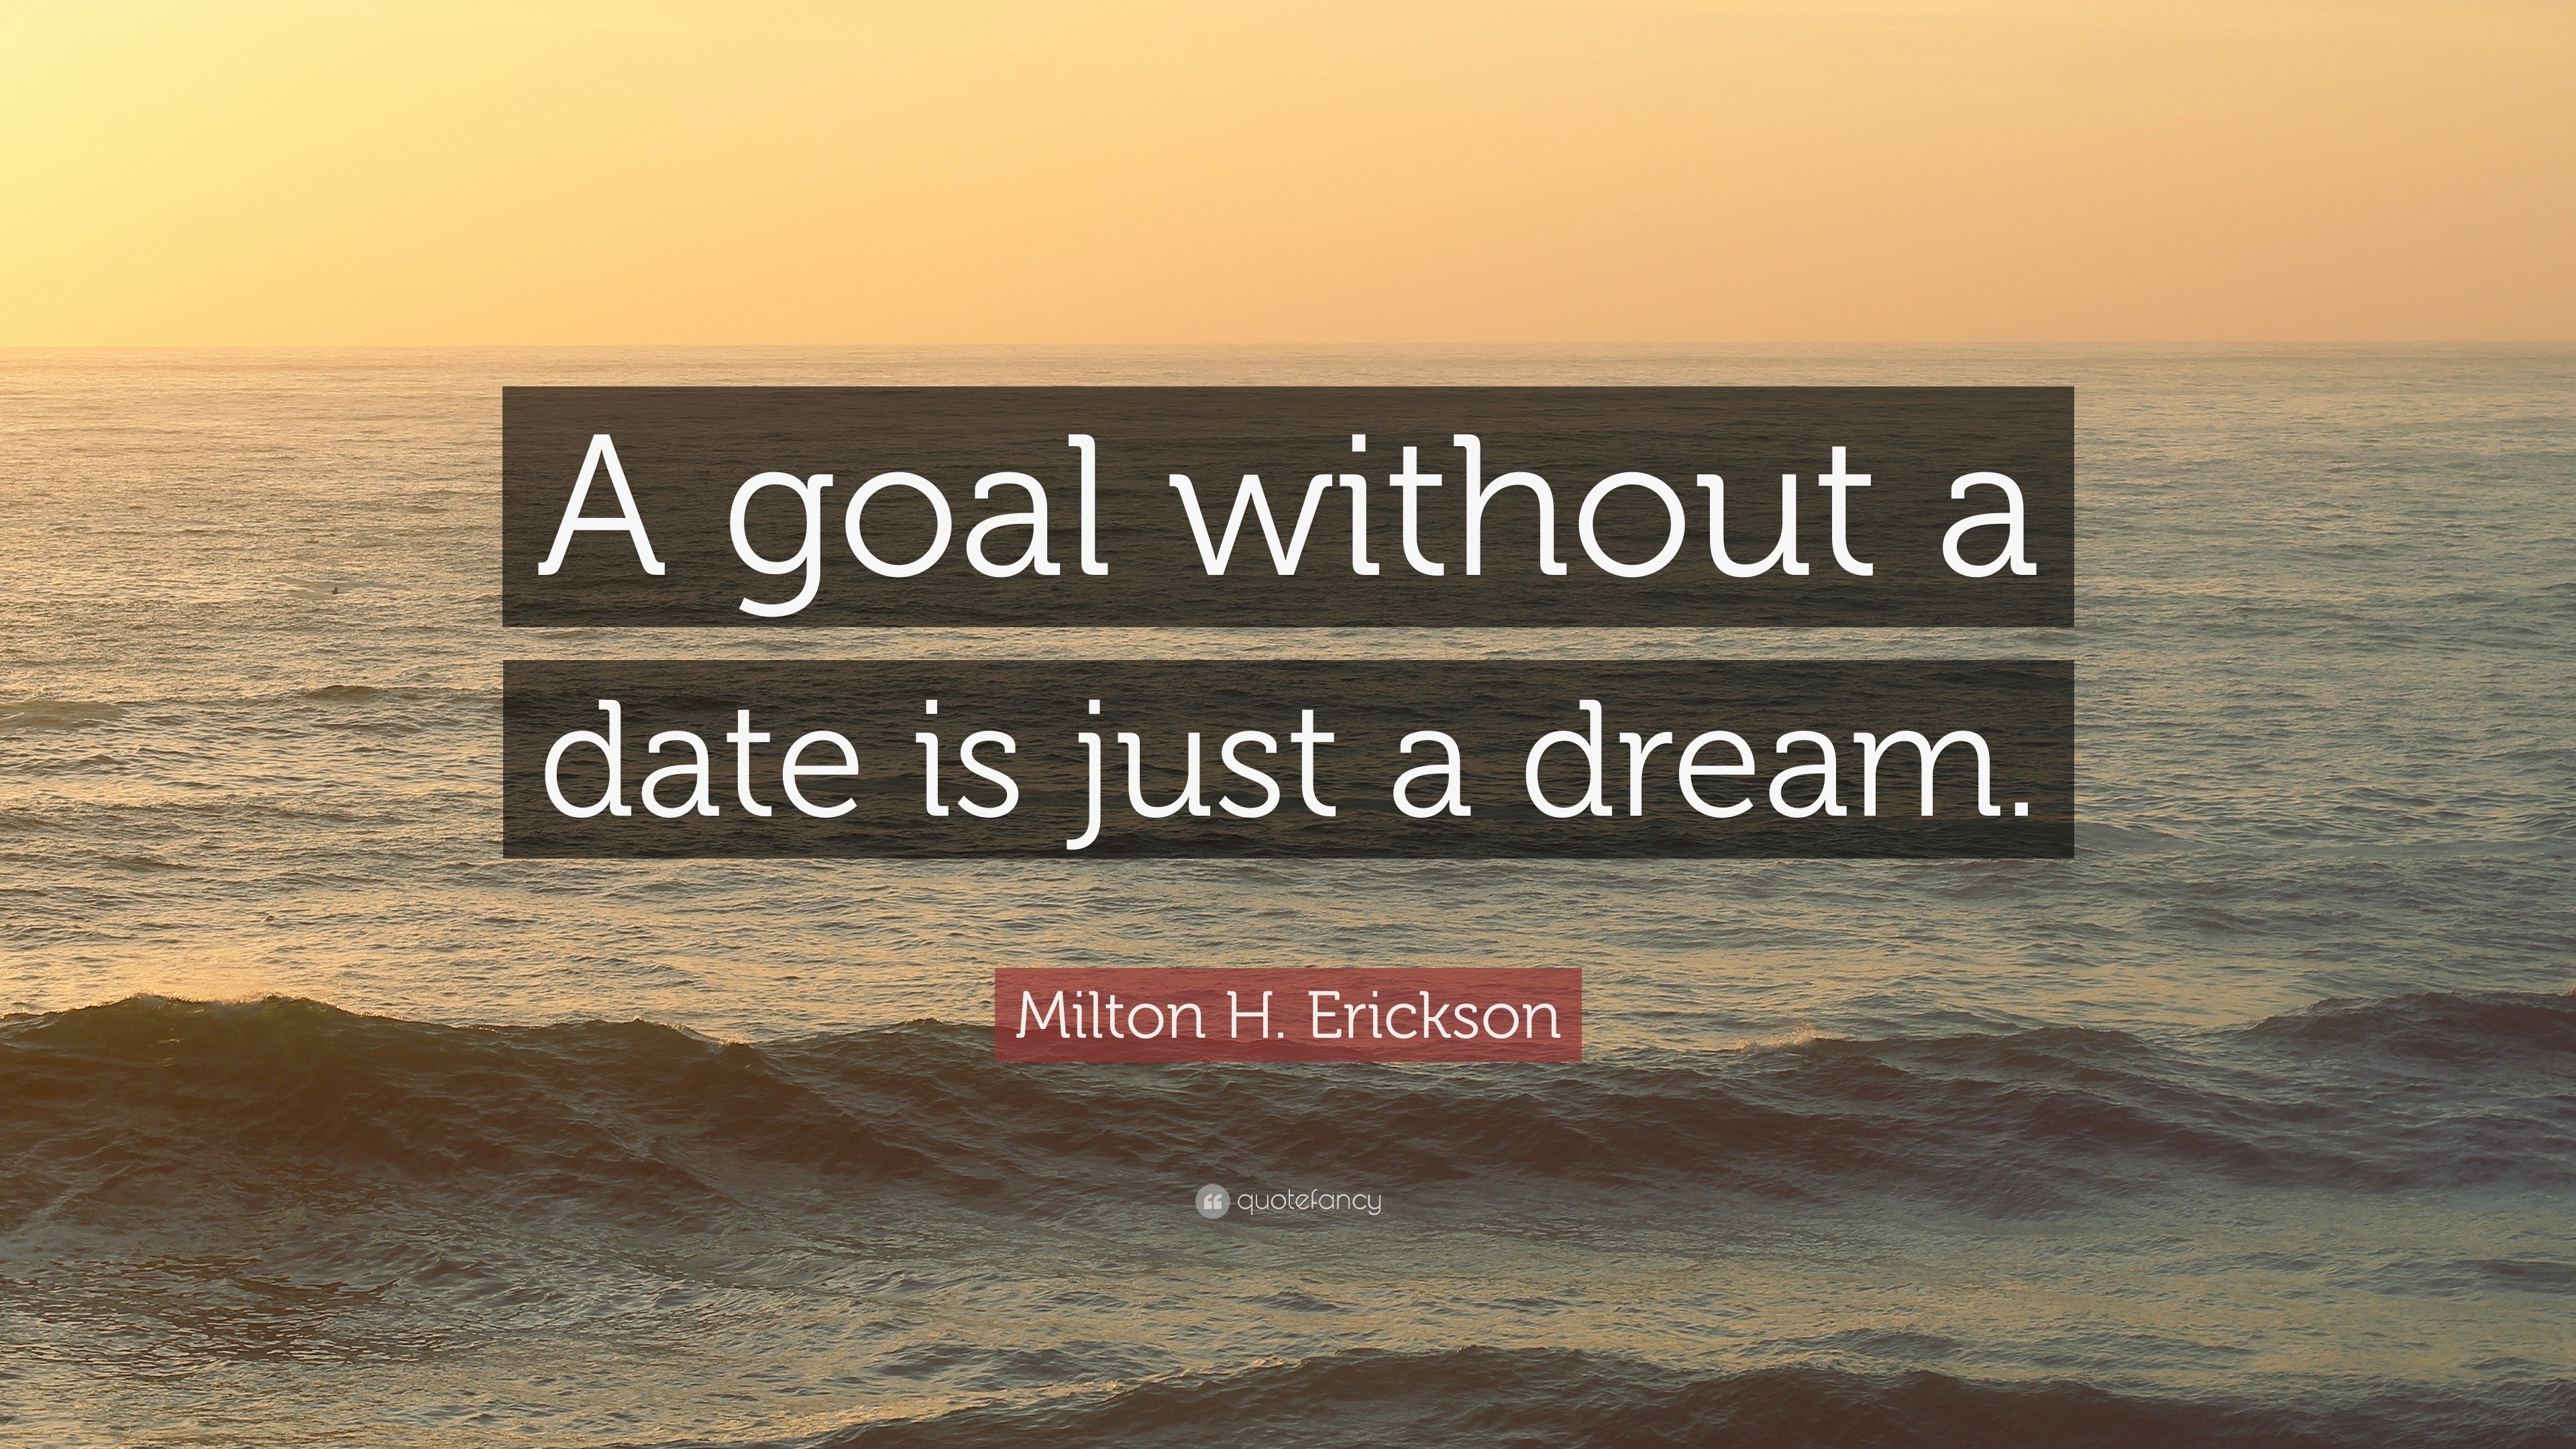 Milton H. Erickson Quote: “A goal without a date is just a dream.”